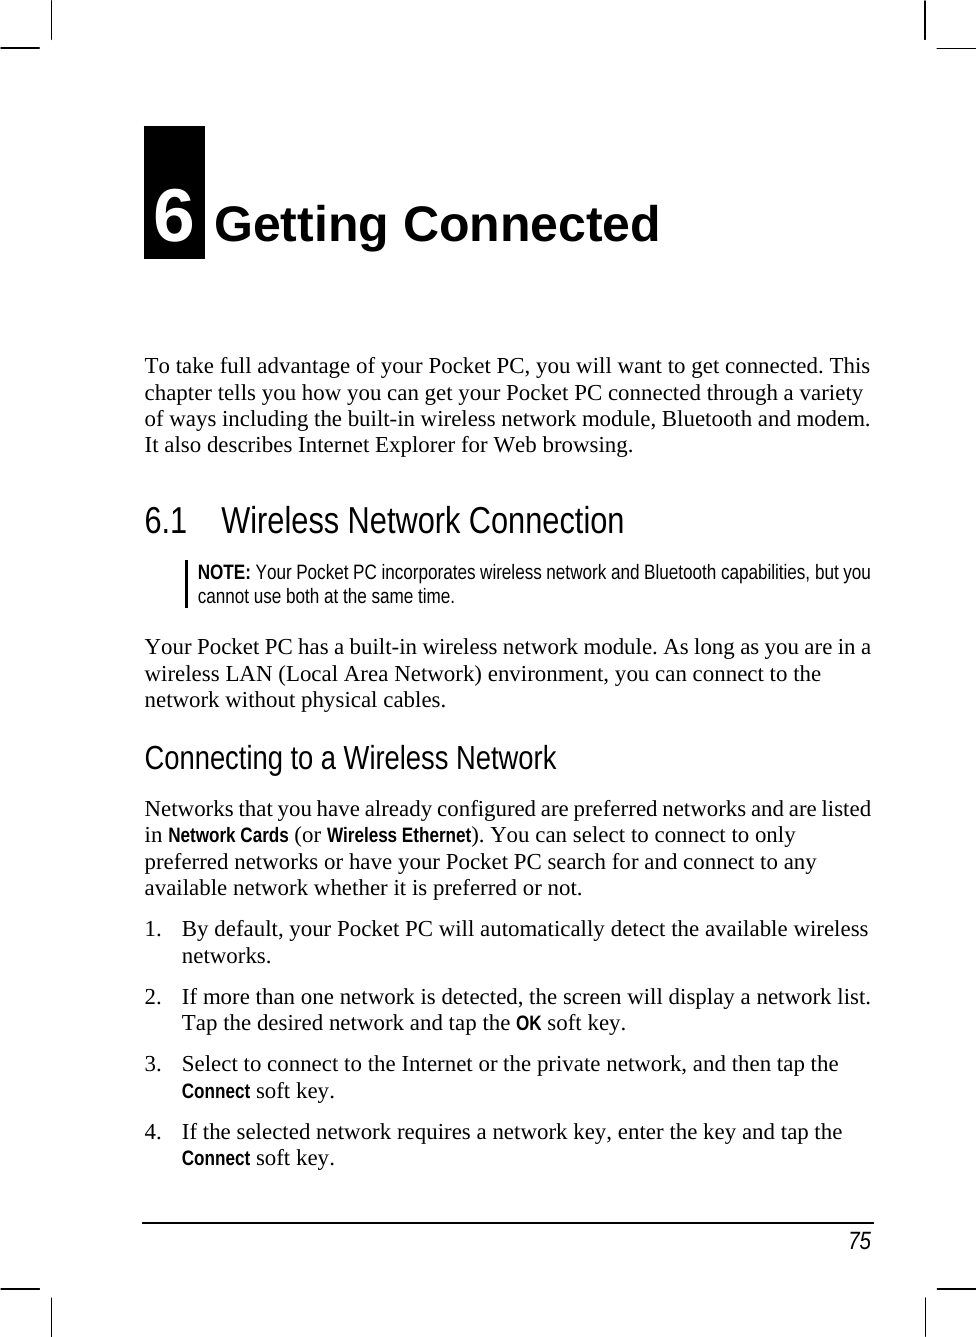   75 6 Getting Connected To take full advantage of your Pocket PC, you will want to get connected. This chapter tells you how you can get your Pocket PC connected through a variety of ways including the built-in wireless network module, Bluetooth and modem. It also describes Internet Explorer for Web browsing. 6.1 Wireless Network Connection NOTE: Your Pocket PC incorporates wireless network and Bluetooth capabilities, but you cannot use both at the same time.  Your Pocket PC has a built-in wireless network module. As long as you are in a wireless LAN (Local Area Network) environment, you can connect to the network without physical cables. Connecting to a Wireless Network Networks that you have already configured are preferred networks and are listed in Network Cards (or Wireless Ethernet). You can select to connect to only preferred networks or have your Pocket PC search for and connect to any available network whether it is preferred or not. 1. By default, your Pocket PC will automatically detect the available wireless networks. 2. If more than one network is detected, the screen will display a network list. Tap the desired network and tap the OK soft key. 3. Select to connect to the Internet or the private network, and then tap the Connect soft key. 4. If the selected network requires a network key, enter the key and tap the Connect soft key. 